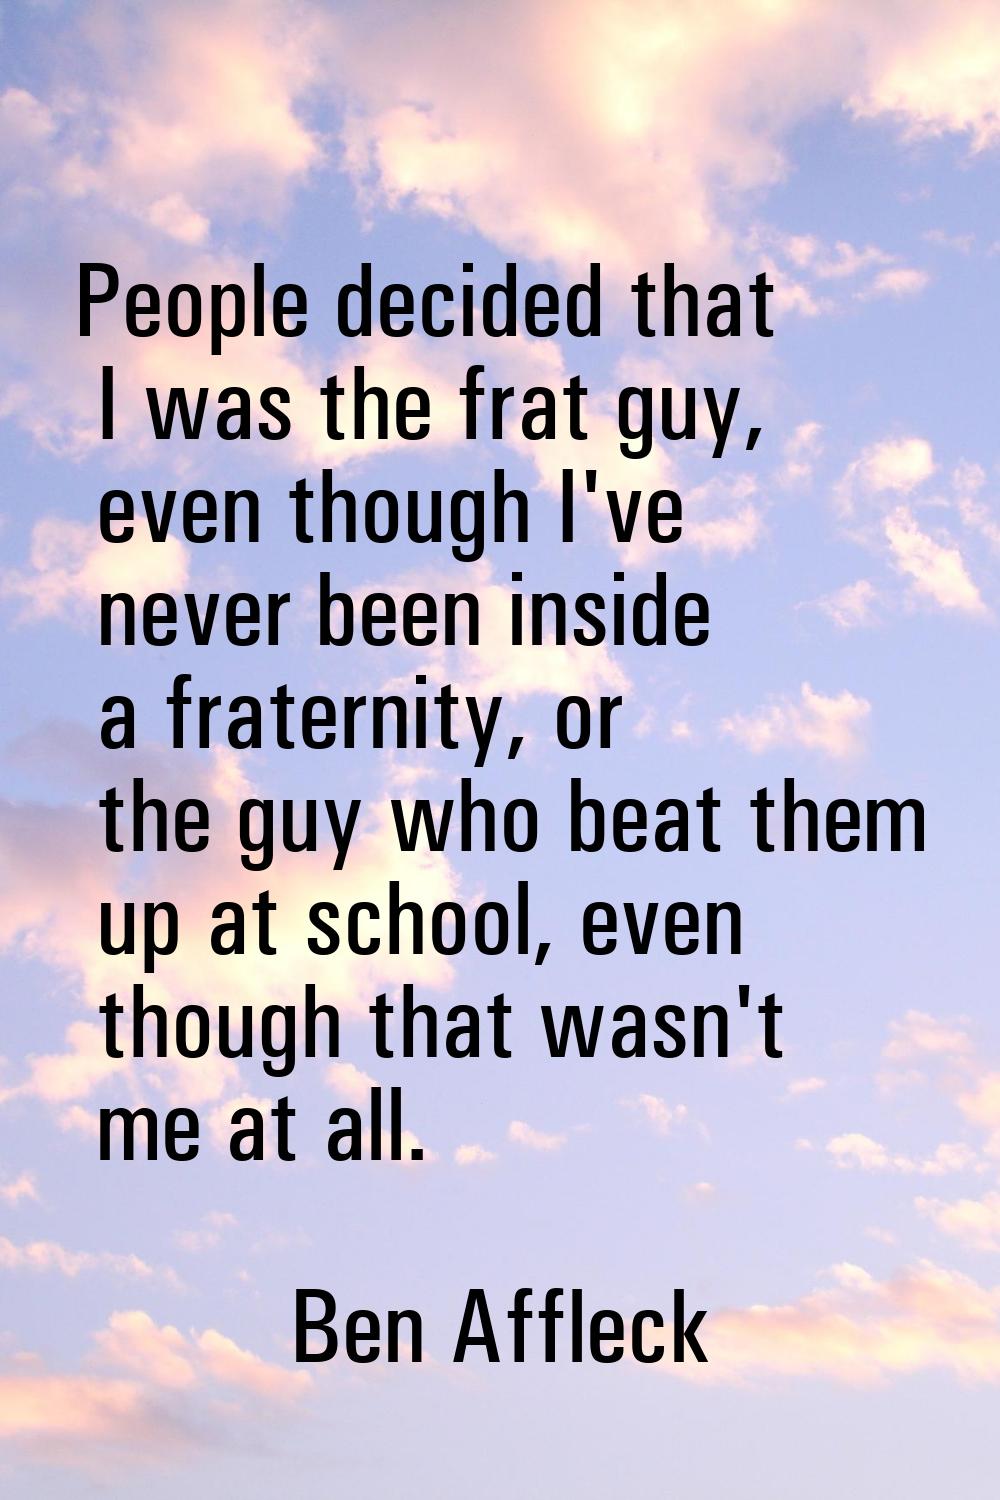 People decided that I was the frat guy, even though I've never been inside a fraternity, or the guy